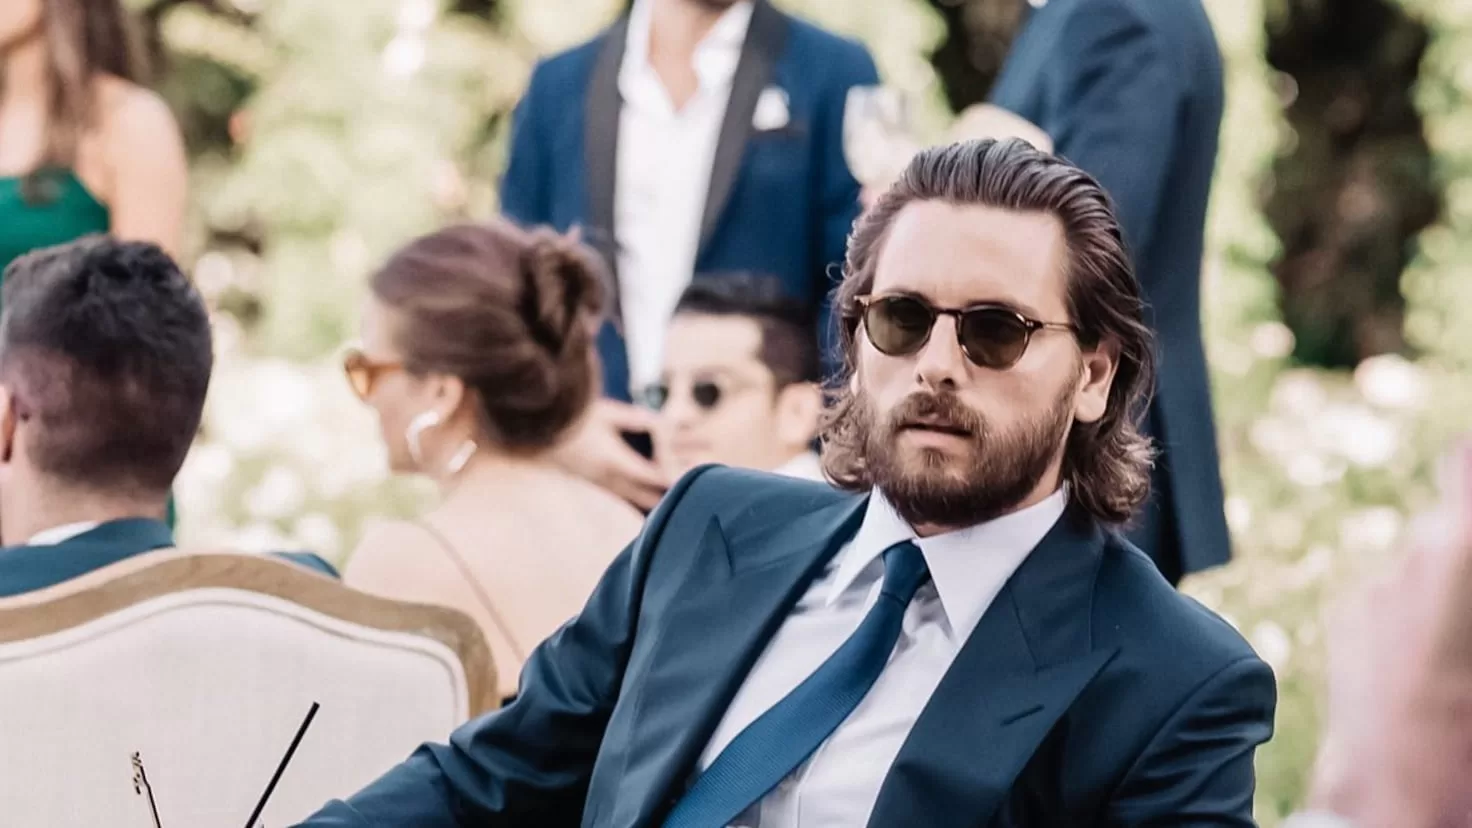 Concern for actor and model Scott Disick due to his latest images visibly deteriorating
